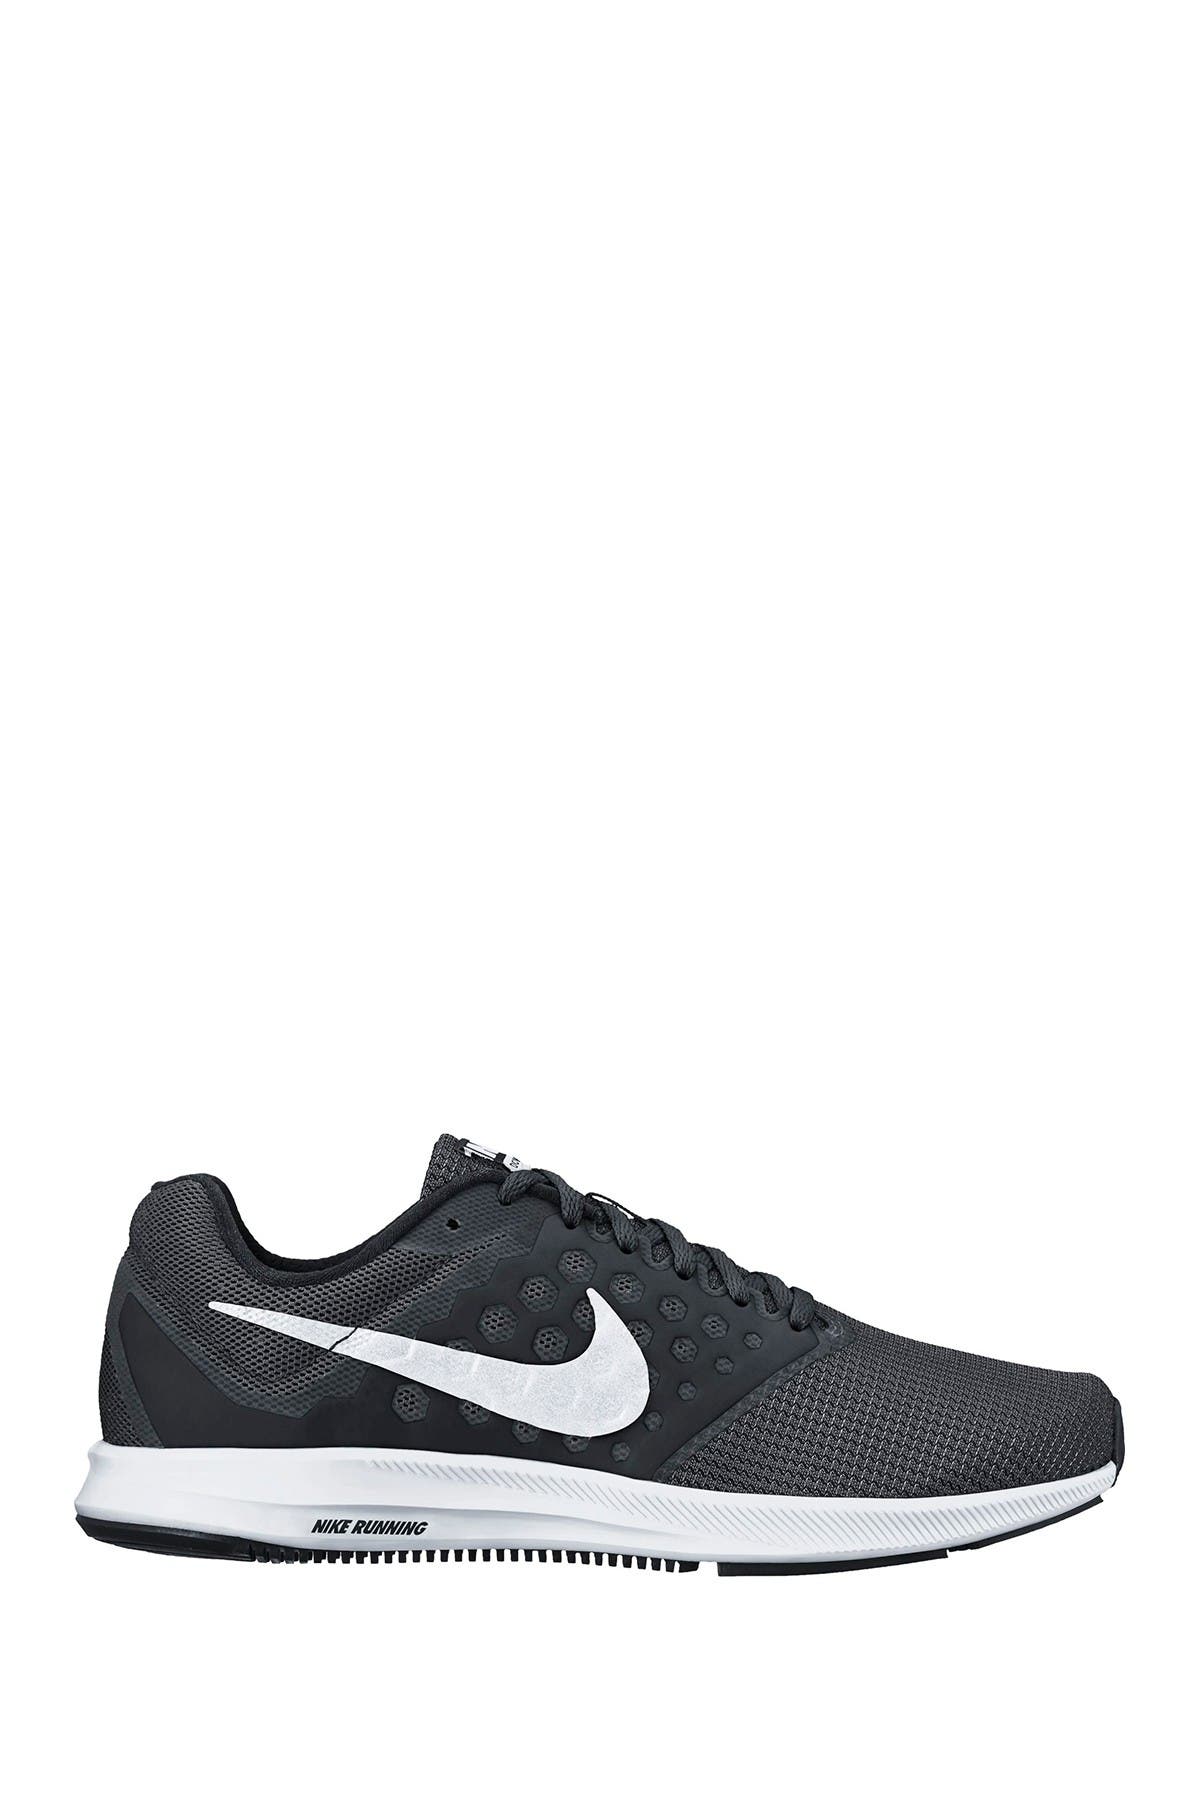 nike downshifter 7 women's black and white